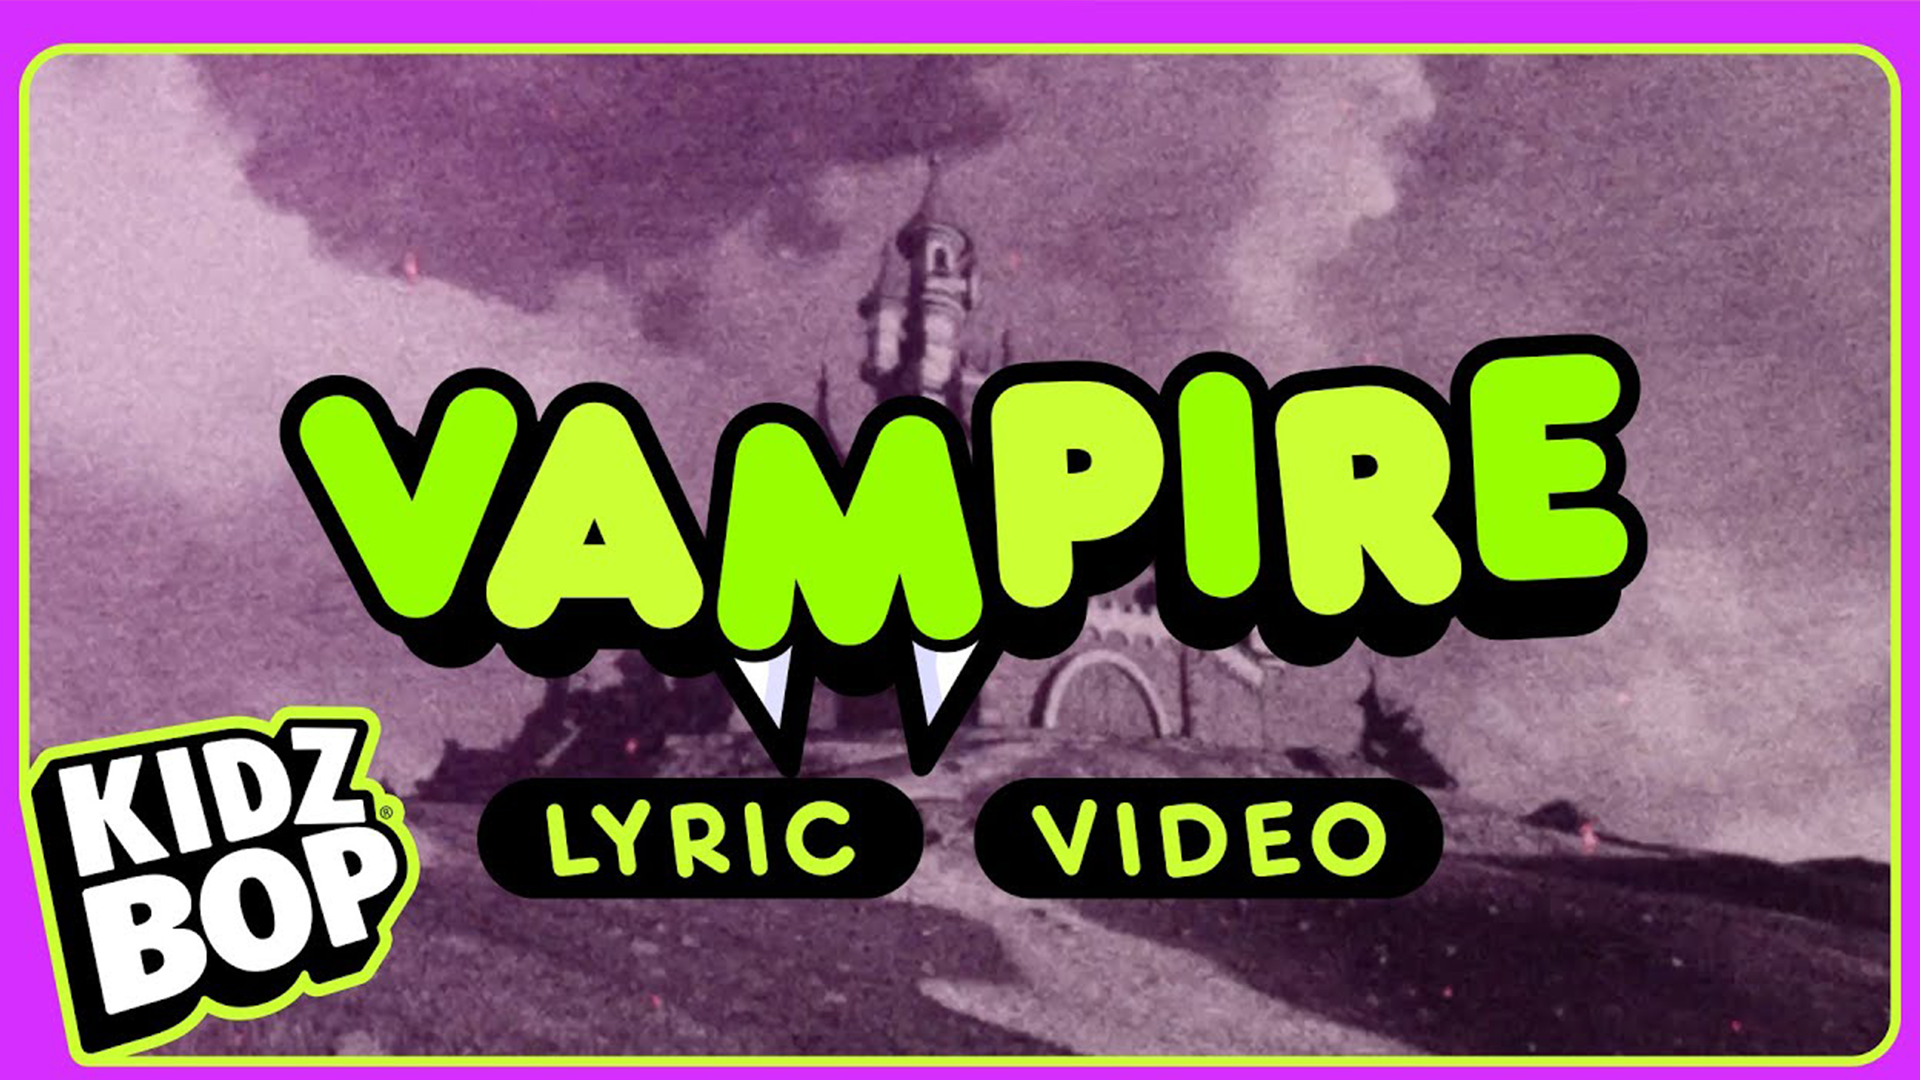 You should watch the Vampire lyric video. This amazing Olivia Rodrigo song is perfect if you're feeling a little gloomy!